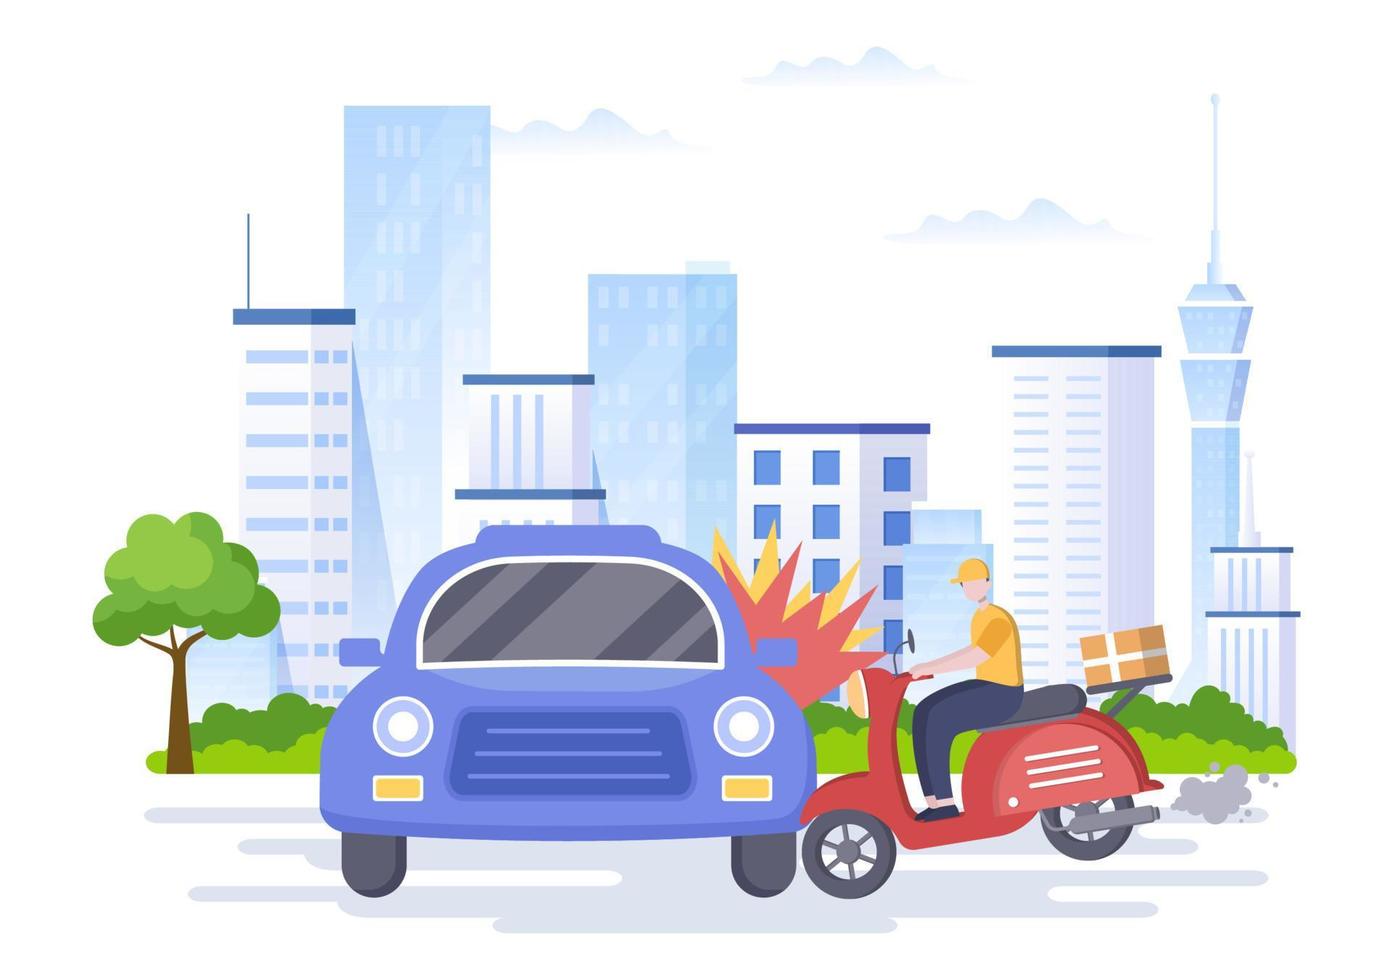 Car Accident Background Illustration with Two Cars Colliding or Hitting Something on the Road Causing Damage in Flat Style vector